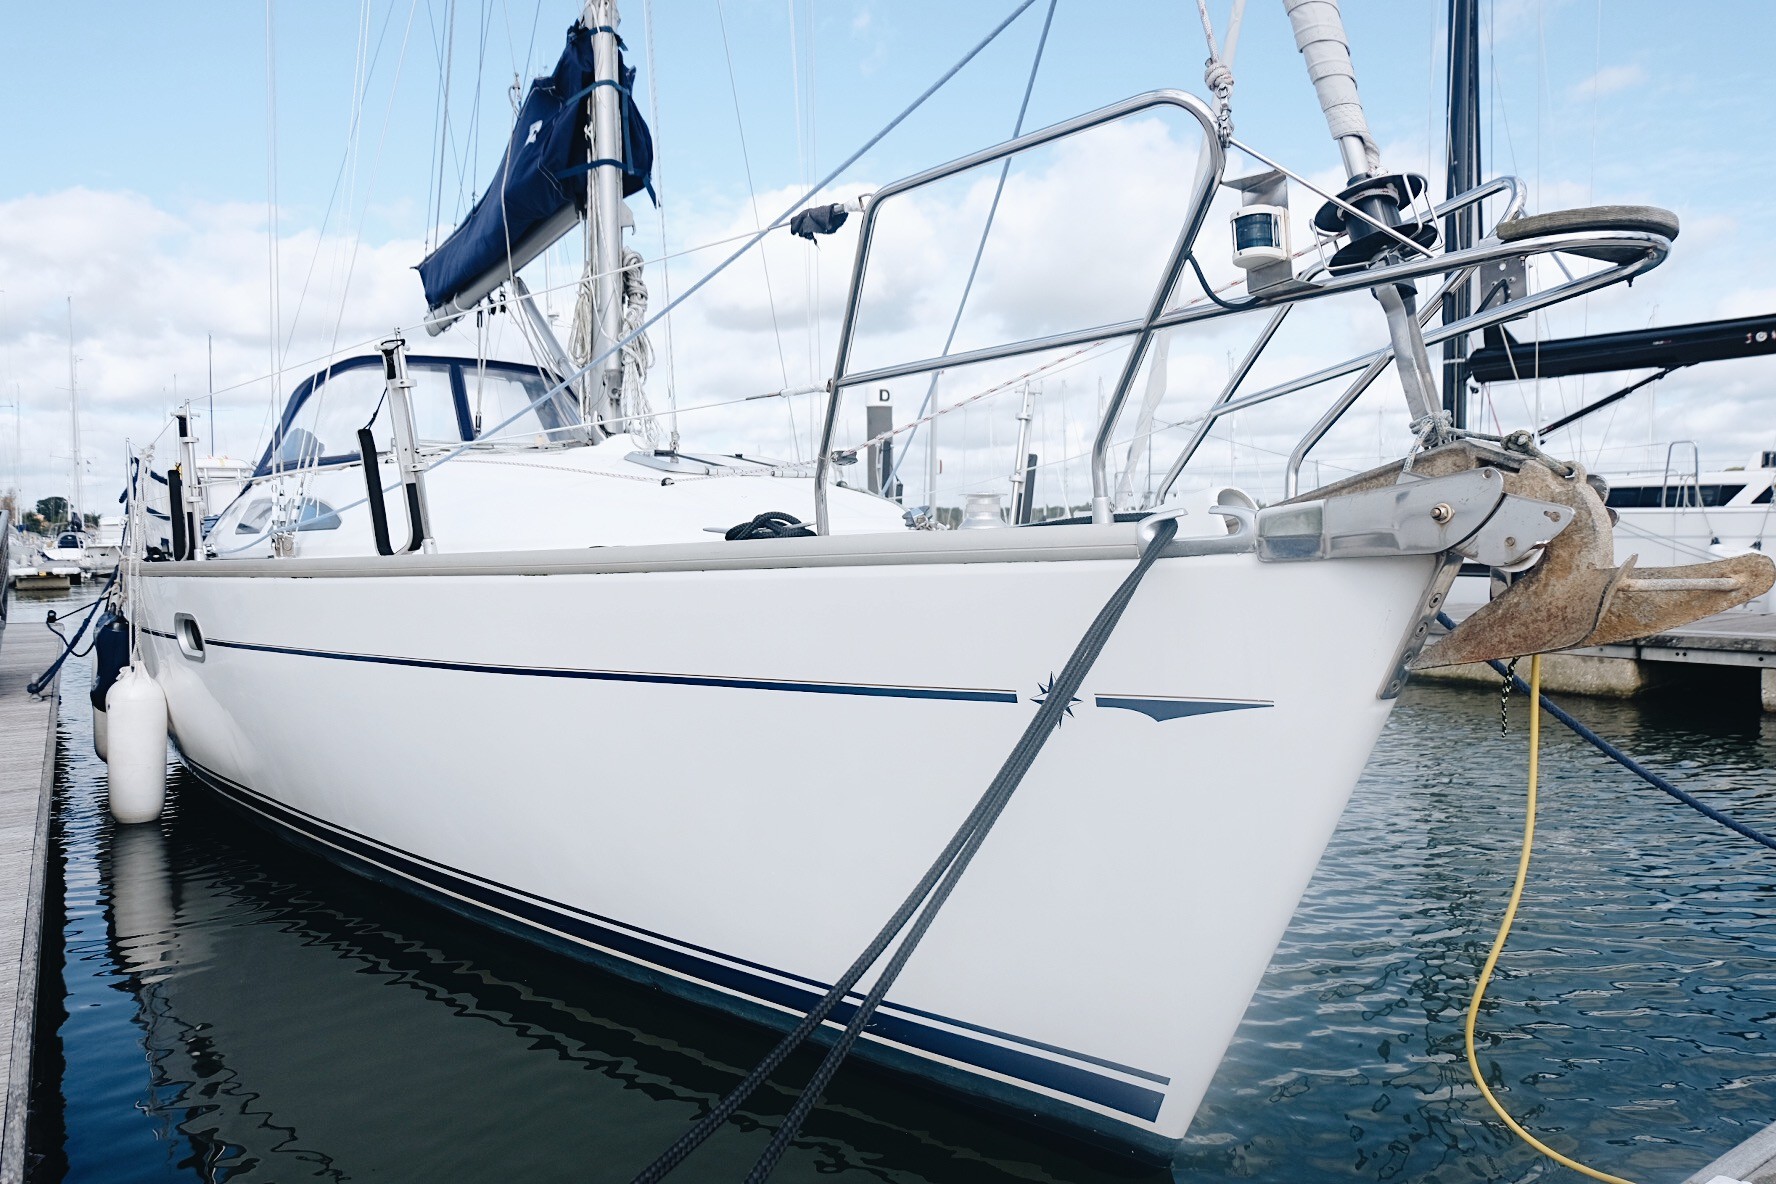 Sun Odyssey 37 - Yacht Charter The Solent & Boat hire in United Kingdom England The Solent Southampton Hamble-Le-Rice Hamble Point Marina 5